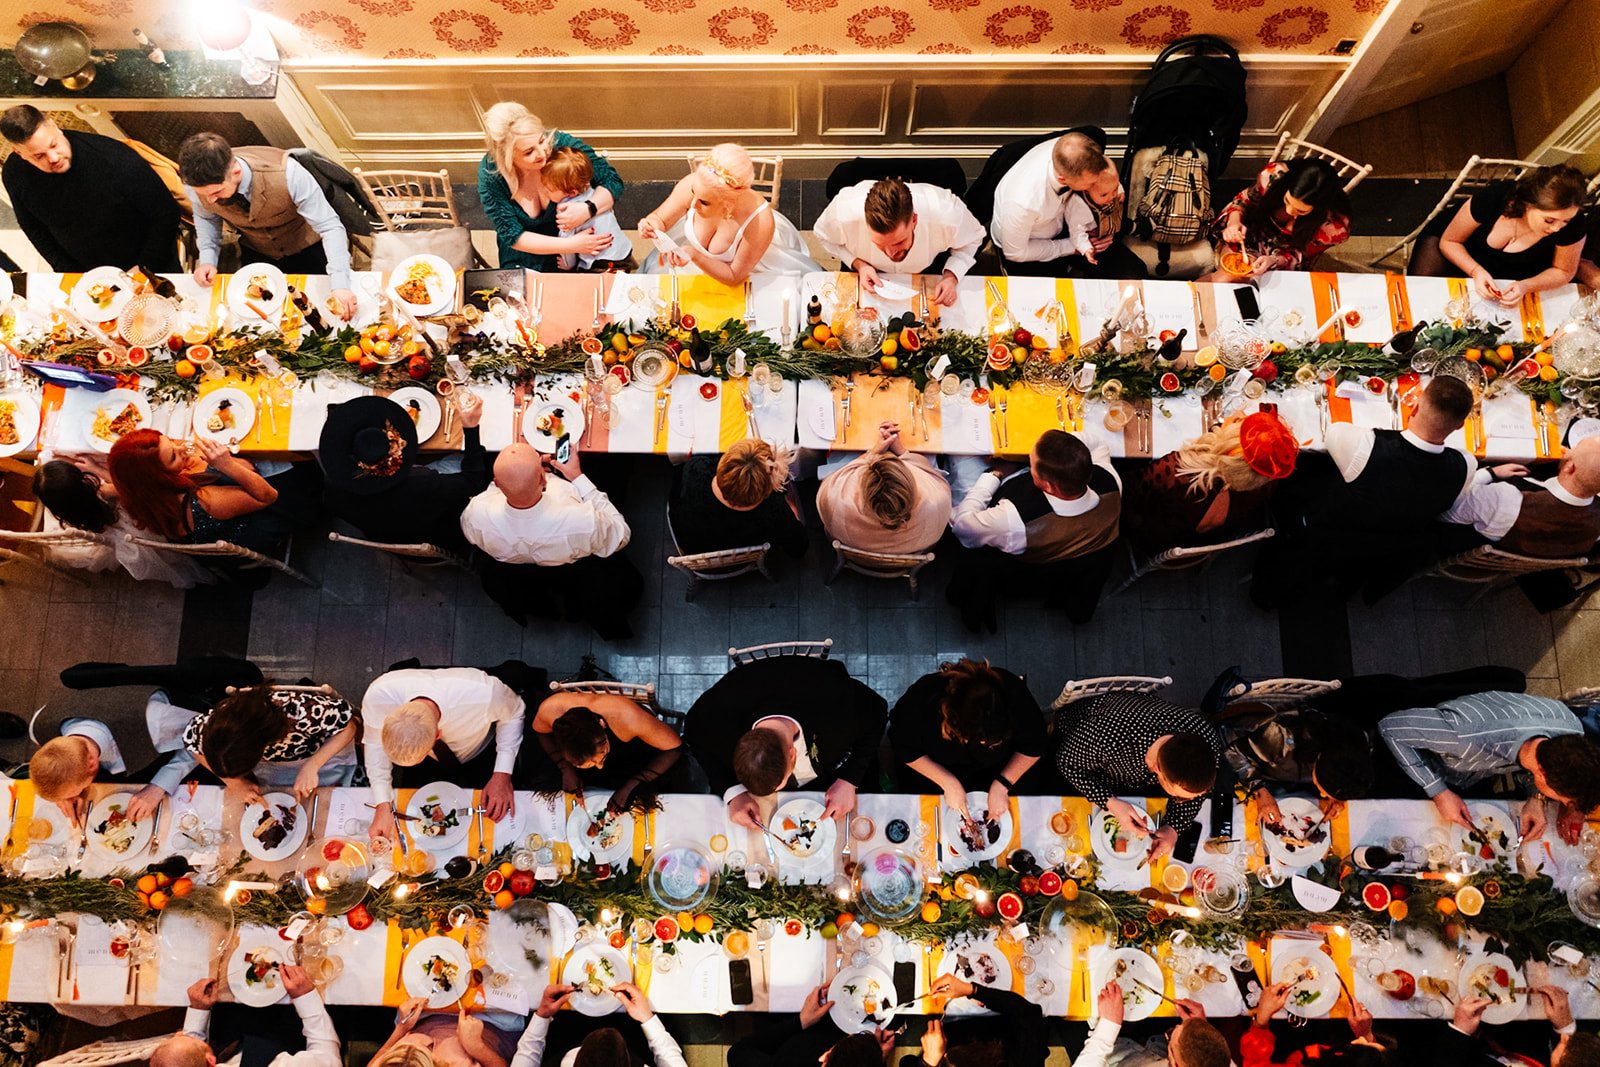 long wedding dinner tables shot from directly above showing the bride, groom and guests all enjoying the wedding meal. wedding at toftcombs in Scotland